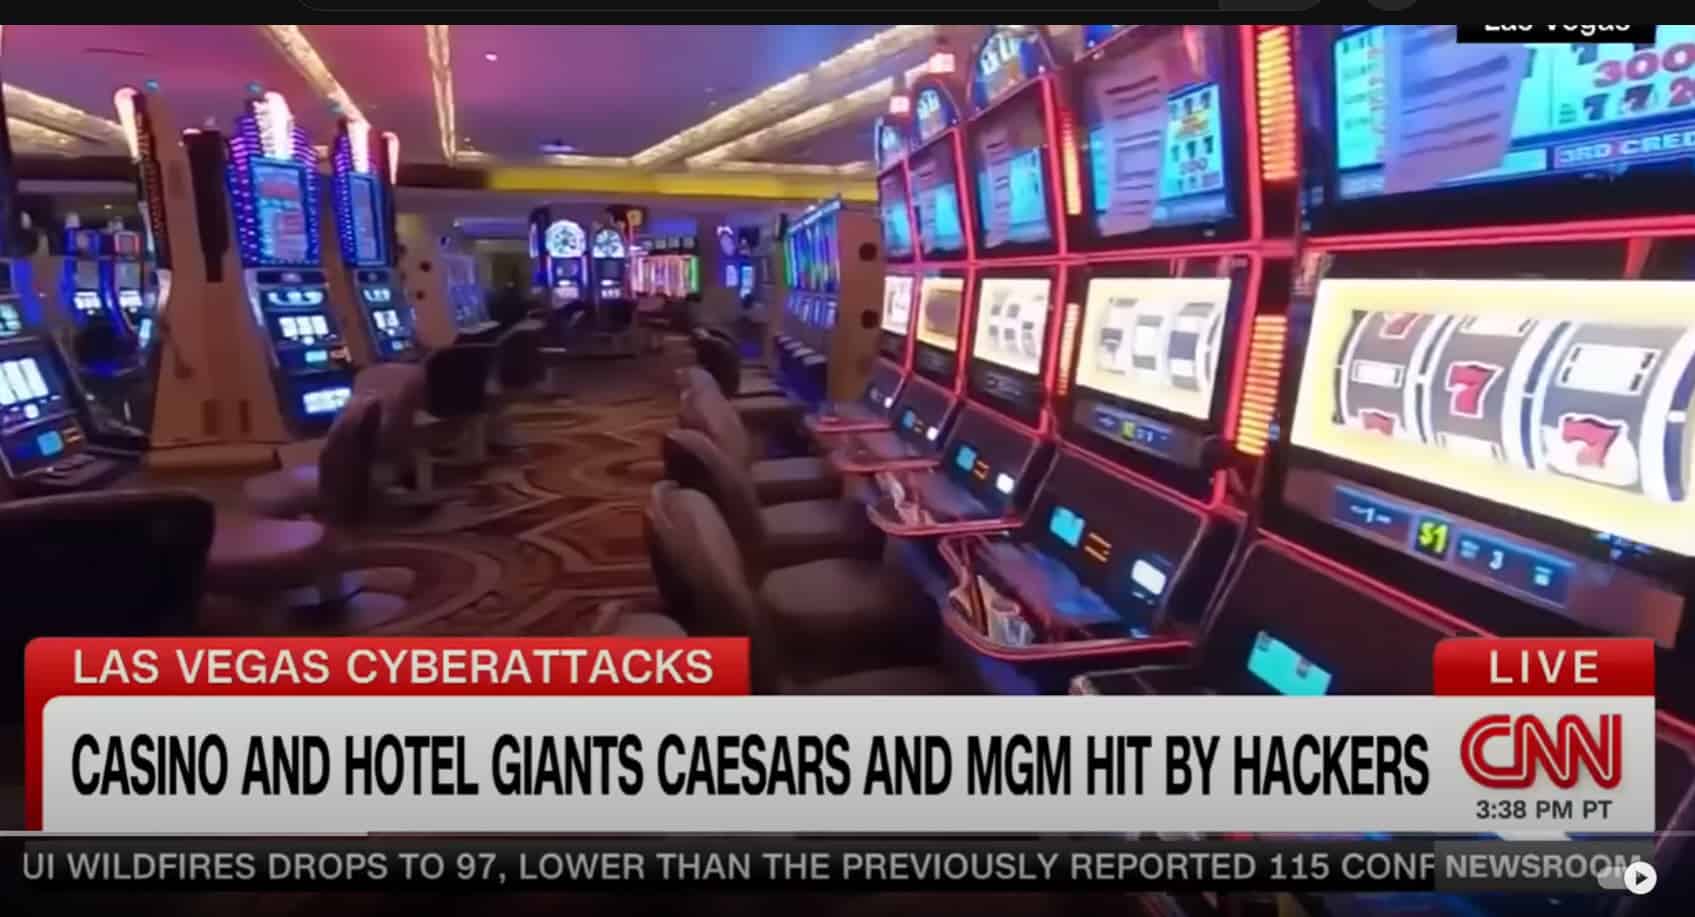 More Vegas casinos hit by cyberattacks, slot machines go down